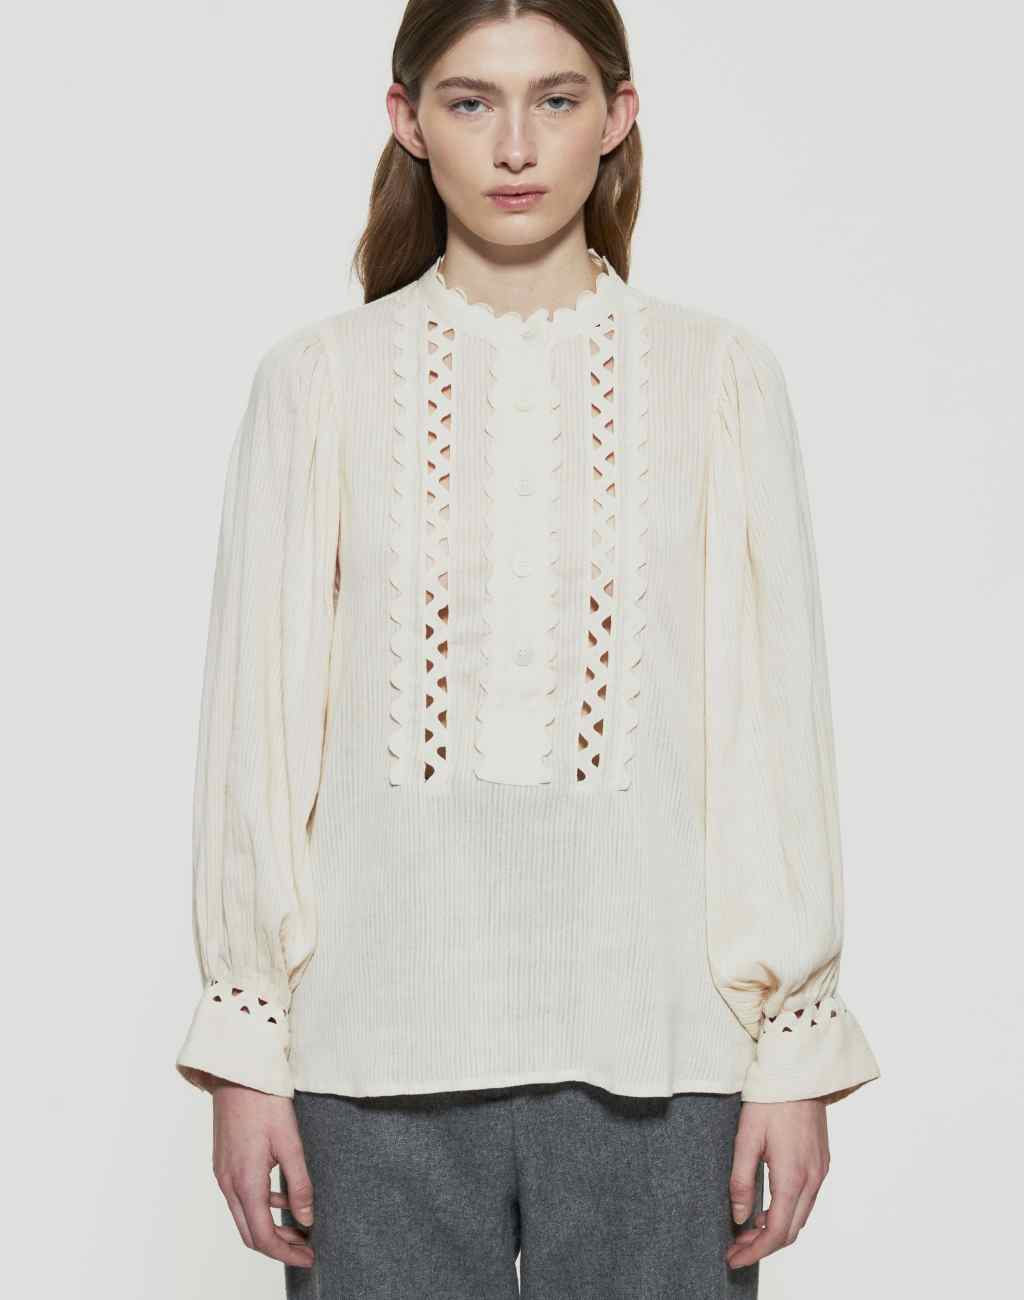 Cream Aya Blouse with Ric Rac and Cut-Out Details